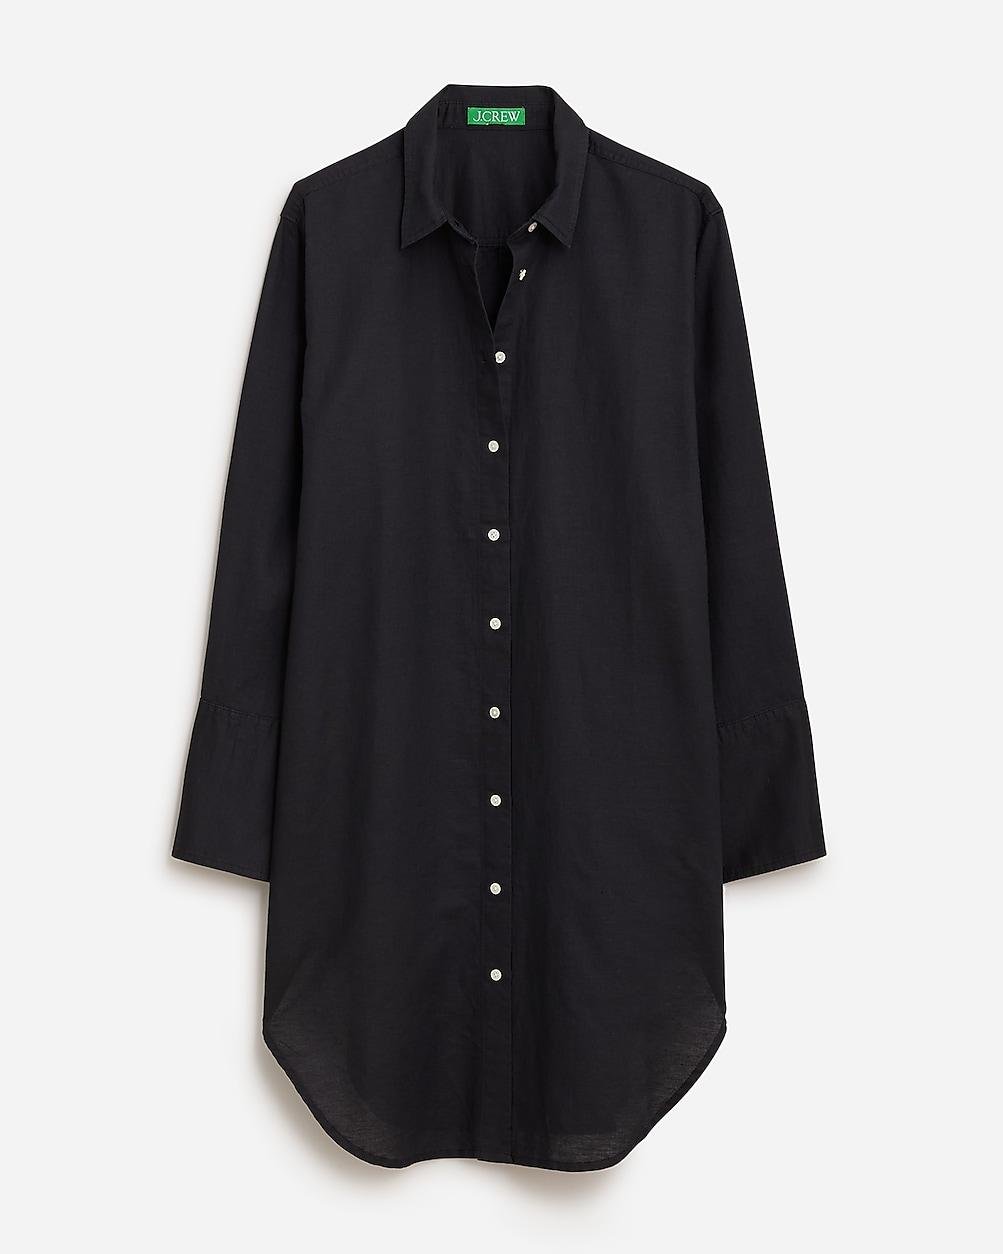 Relaxed-fit beach shirt in linen-cotton blend by J.CREW